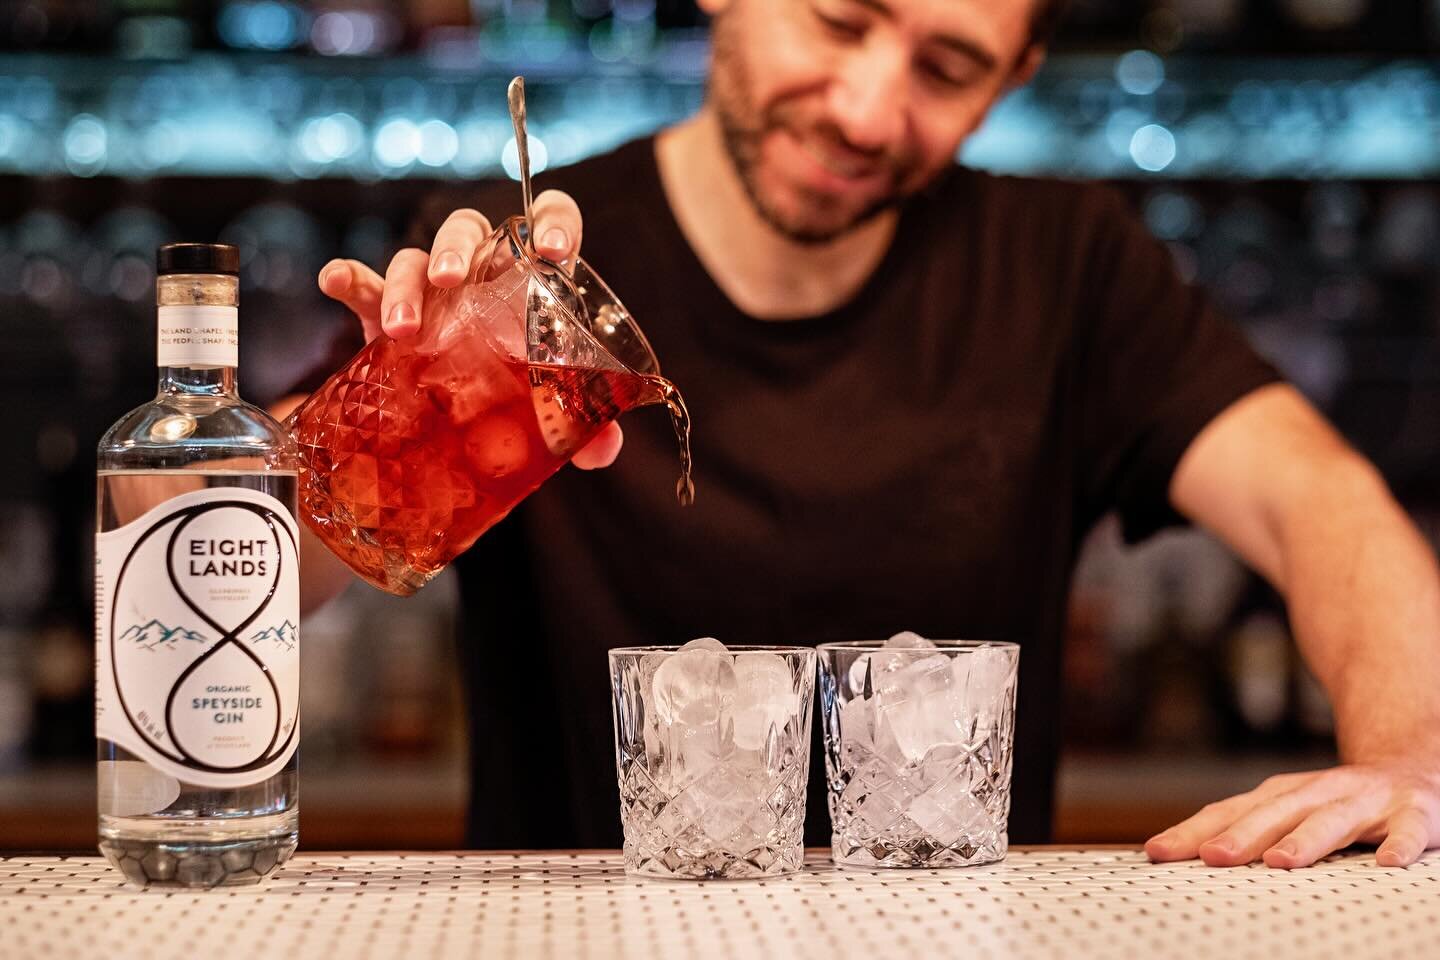 Midweek Negroni anyone? This classic has got to be one of the easiest cocktails to customise. Explore different balances of gin, Campari and vermouth to suit your tastes. Try grapefruit peel instead of orange. And definitely check out the White Negro